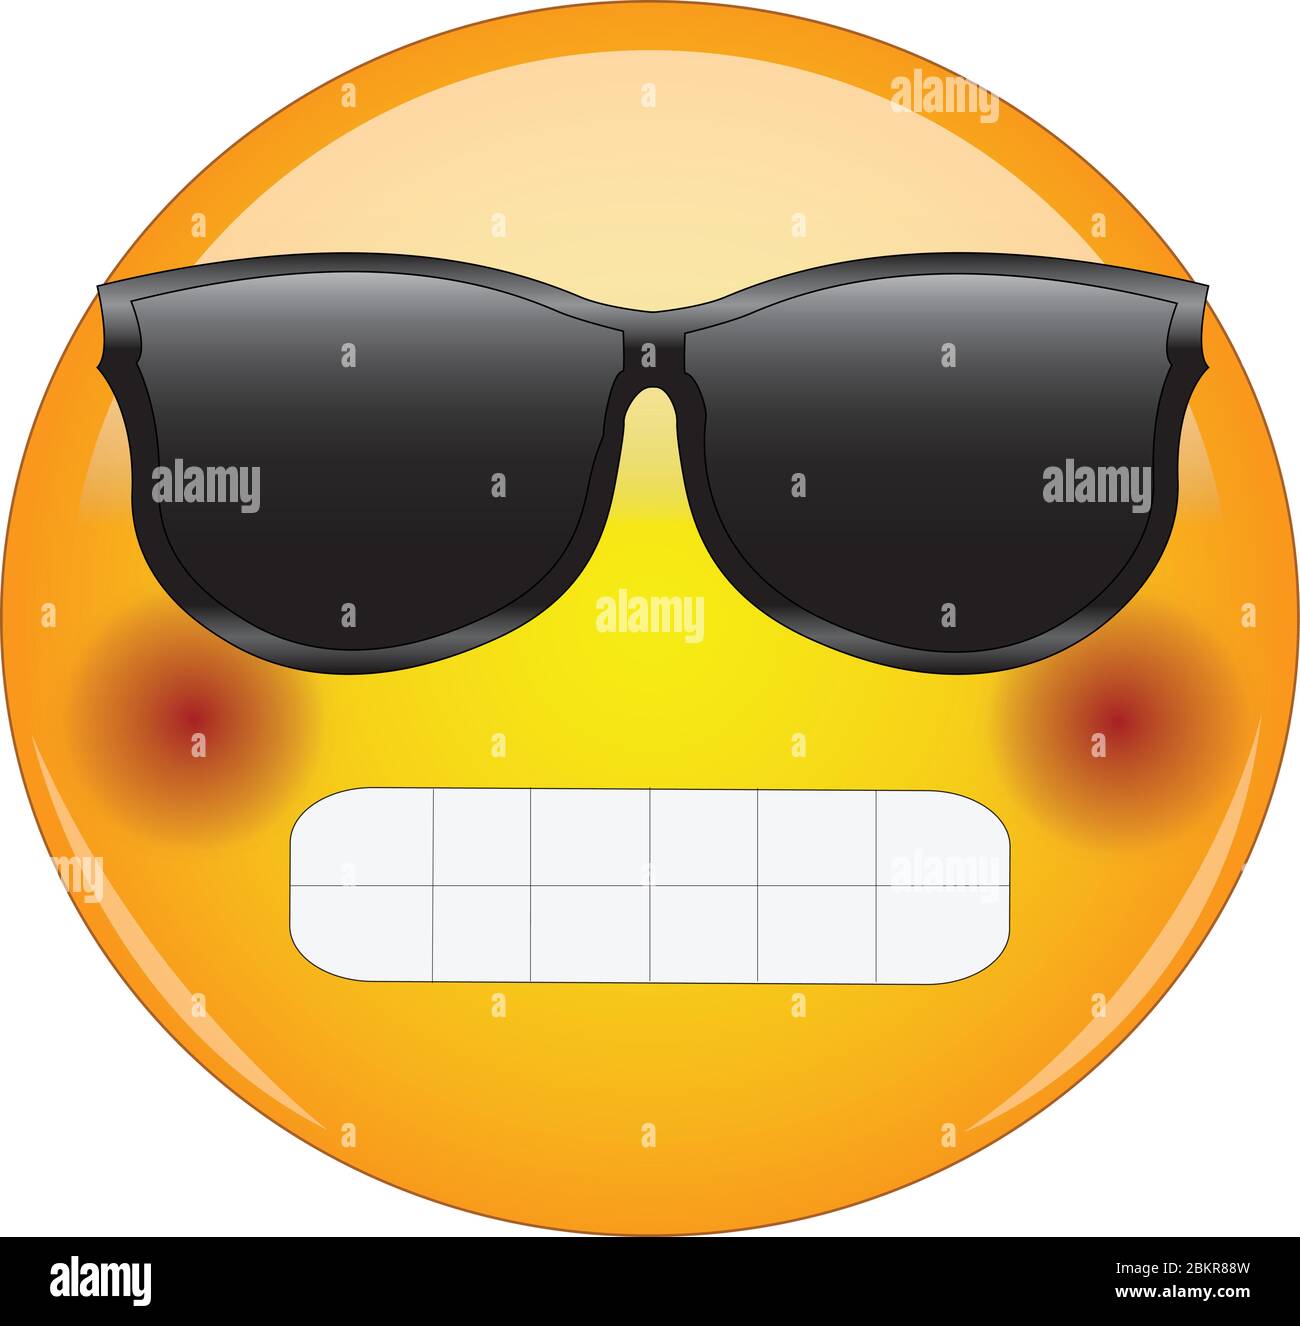 Cool grinning and blushing emoji. Awesome looking yellow face emoticon wearing shades with broad grin and flushed cheeks. Expression of happiness, lov Stock Vector